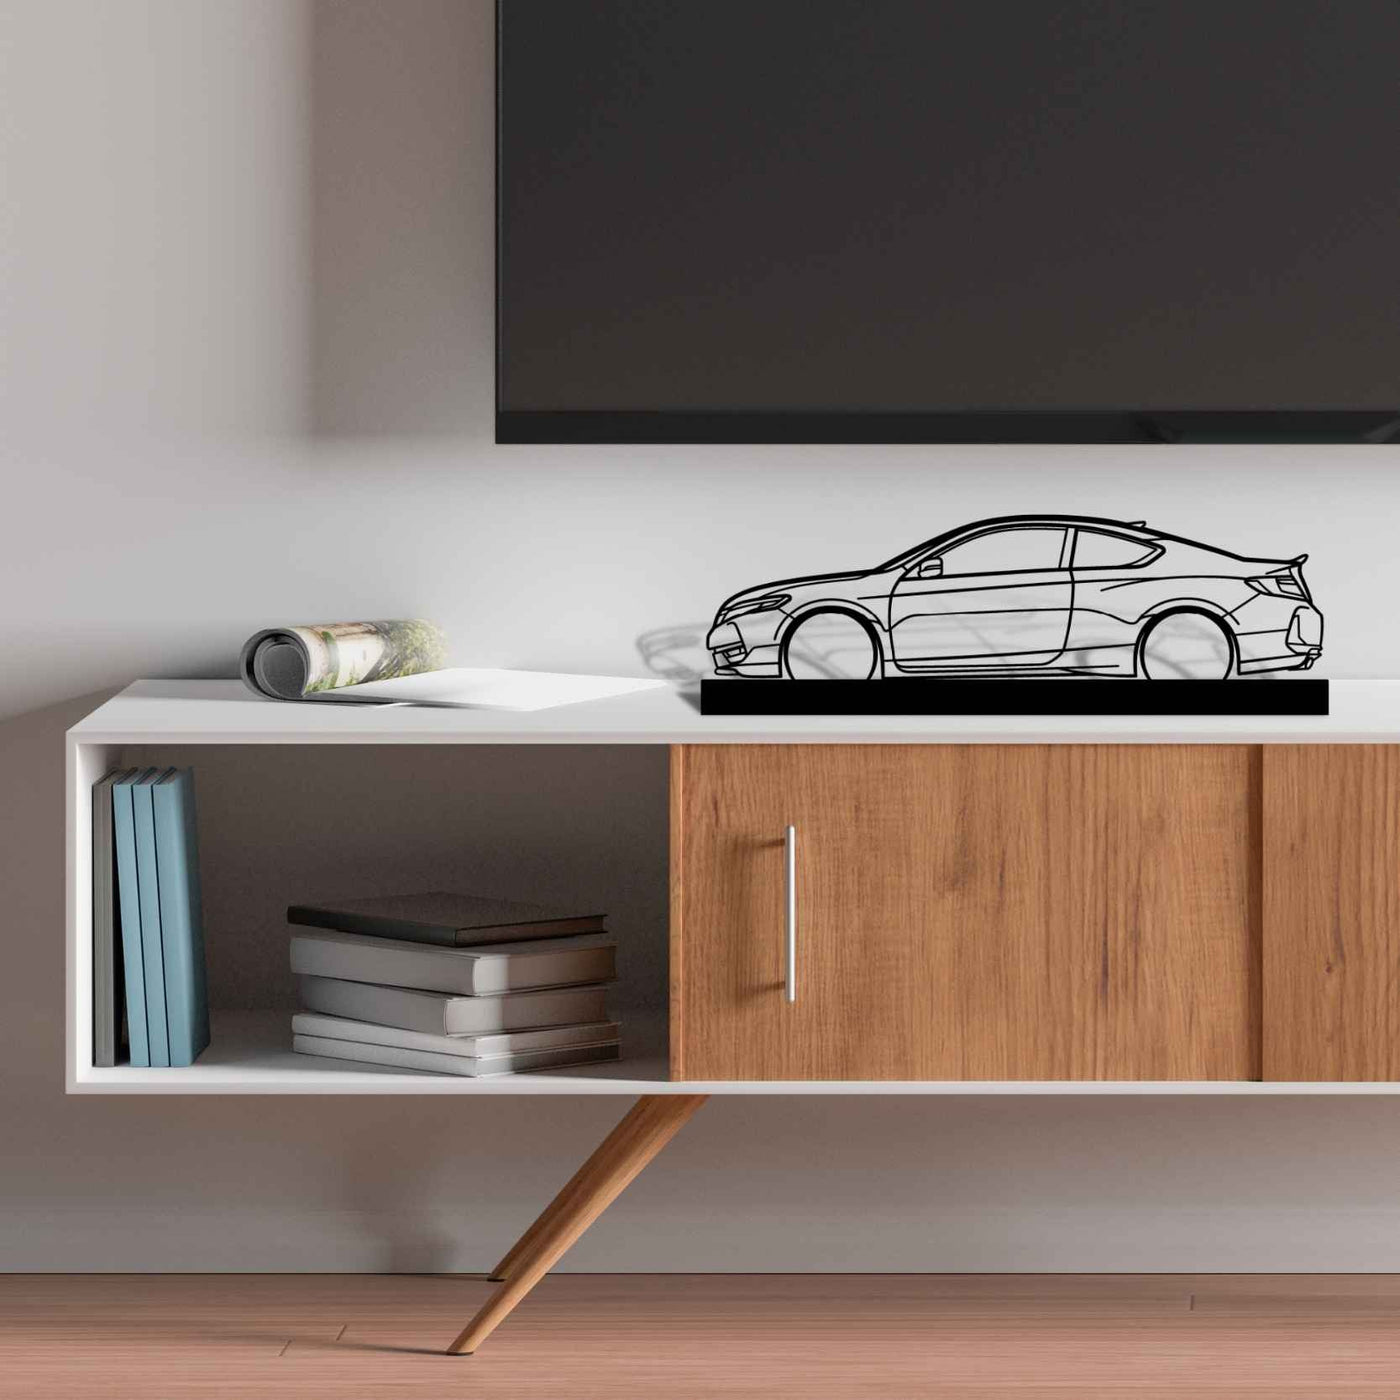 Accord Coupe Silhouette Metal Art Stand